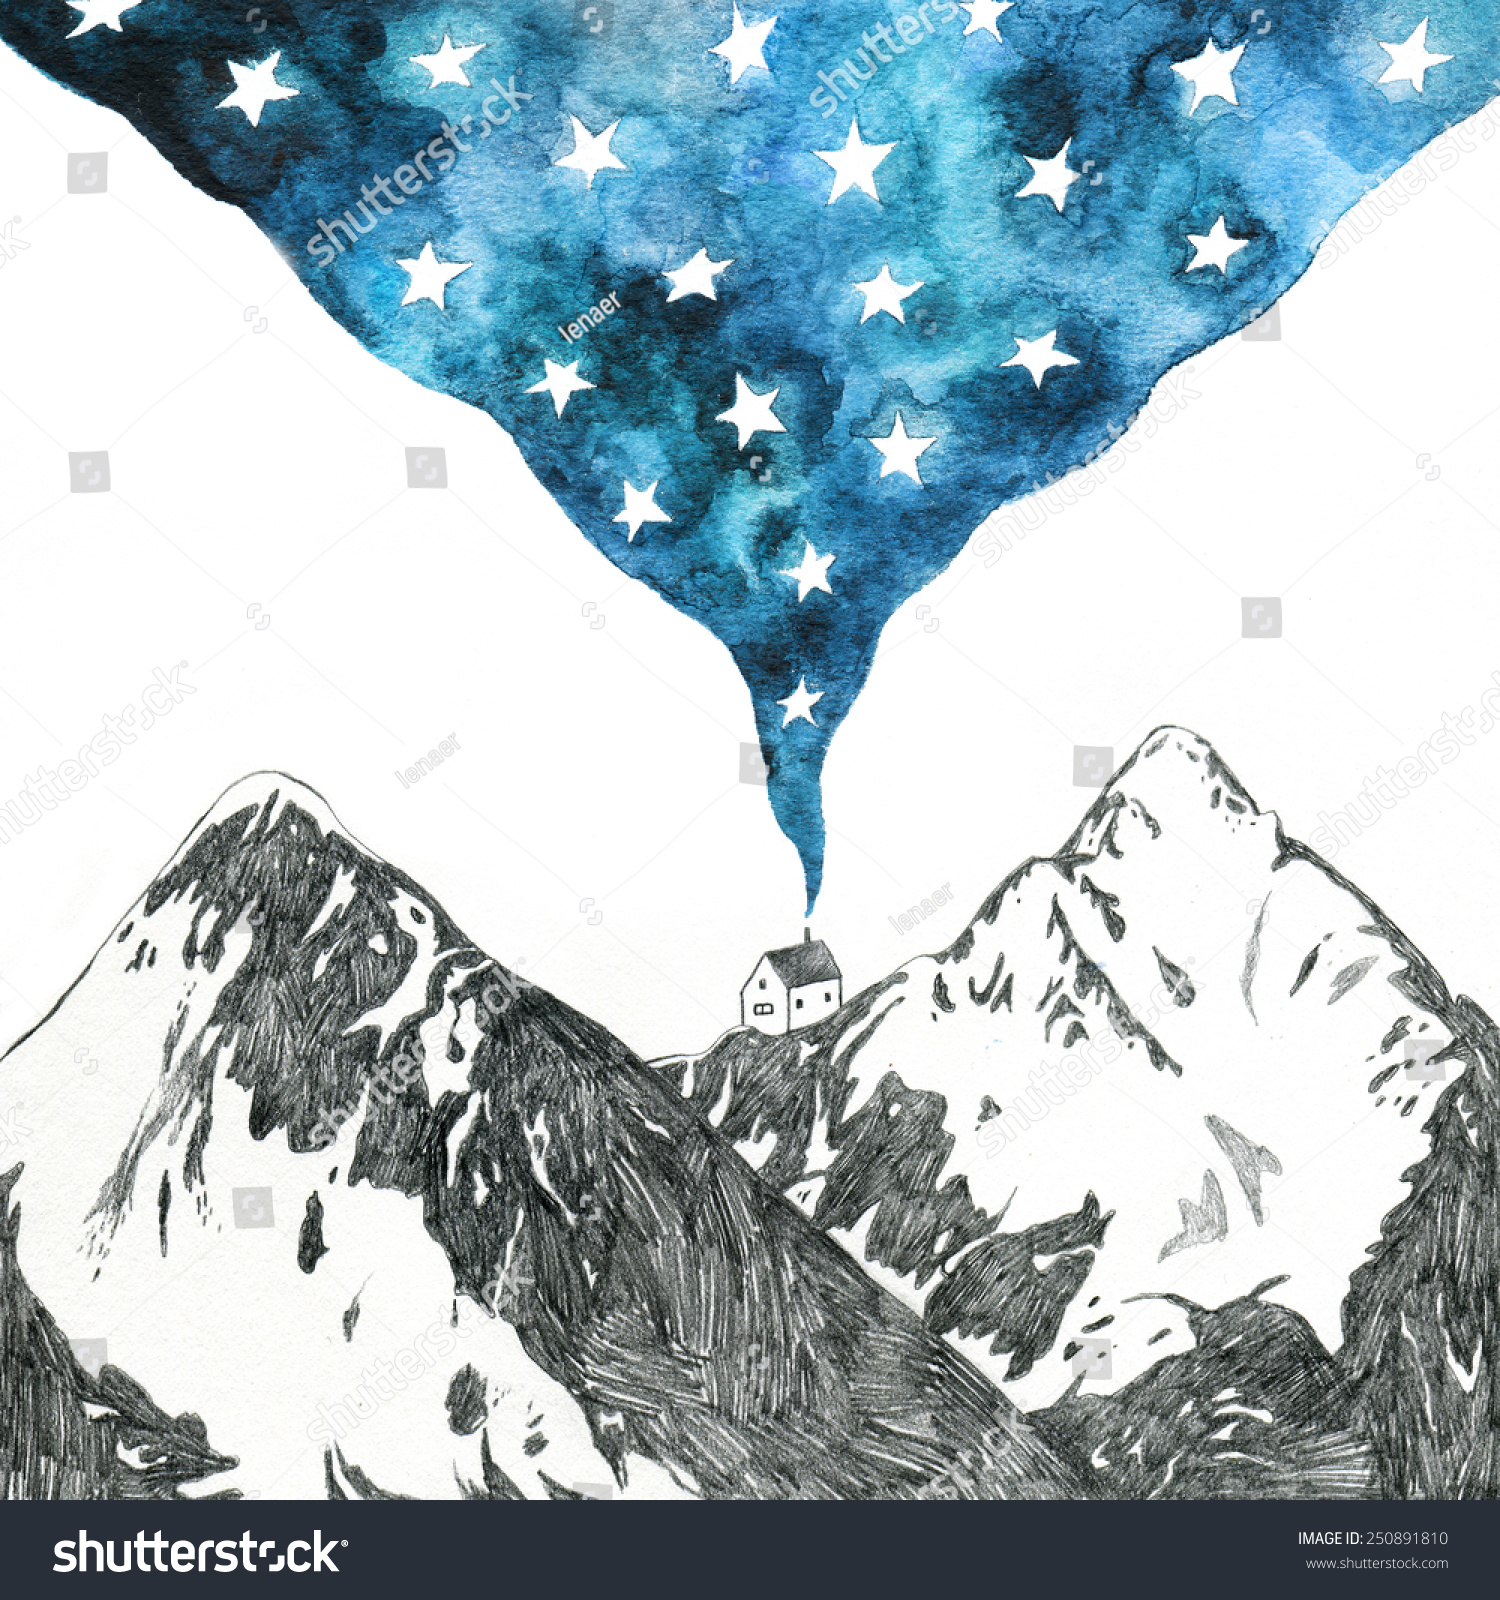 Starry Night Mountain Landscape Pencil Watercolor Stock Illustration 250891810 Begin with a simple sky and mountain range, then add trees and a beach. https www shutterstock com image illustration starry night mountain landscape pencil watercolor 250891810